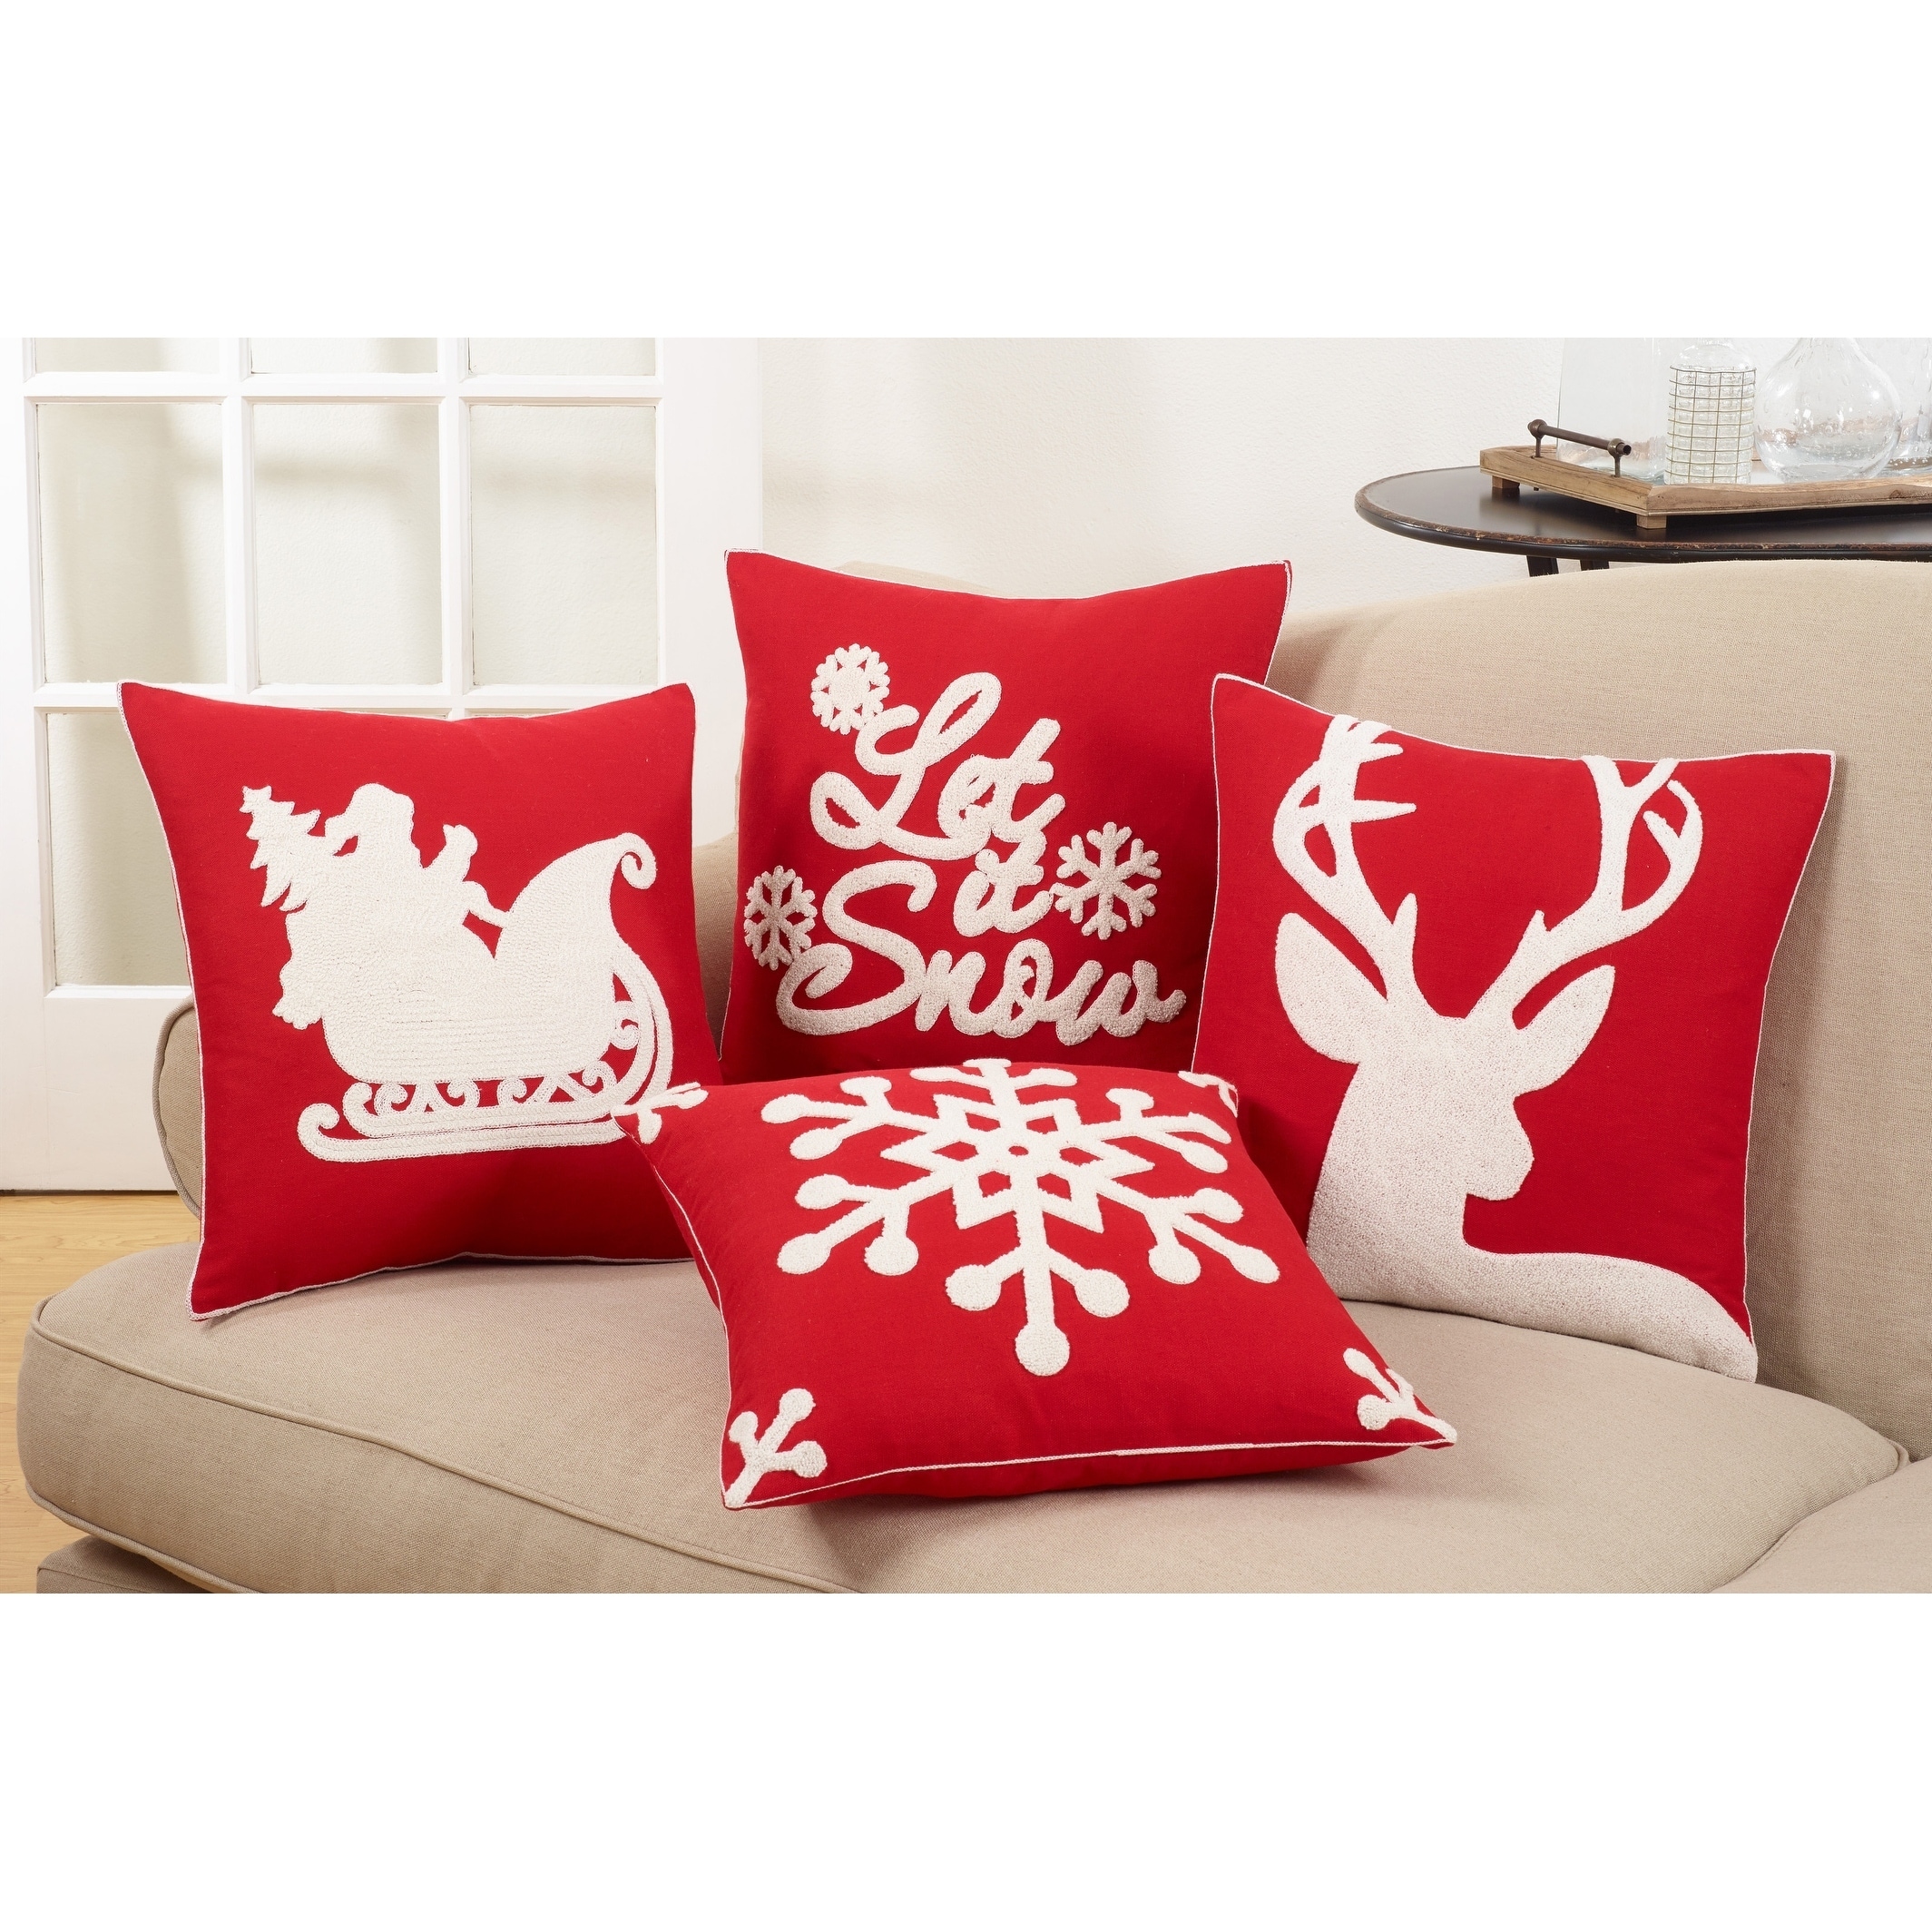 https://ak1.ostkcdn.com/images/products/22858875/Snowflake-Design-Cotton-Blend-Christmas-Pillow-With-Down-Filled-3611f2bd-dc4c-4ee6-8e5c-e3726a73232e.jpg